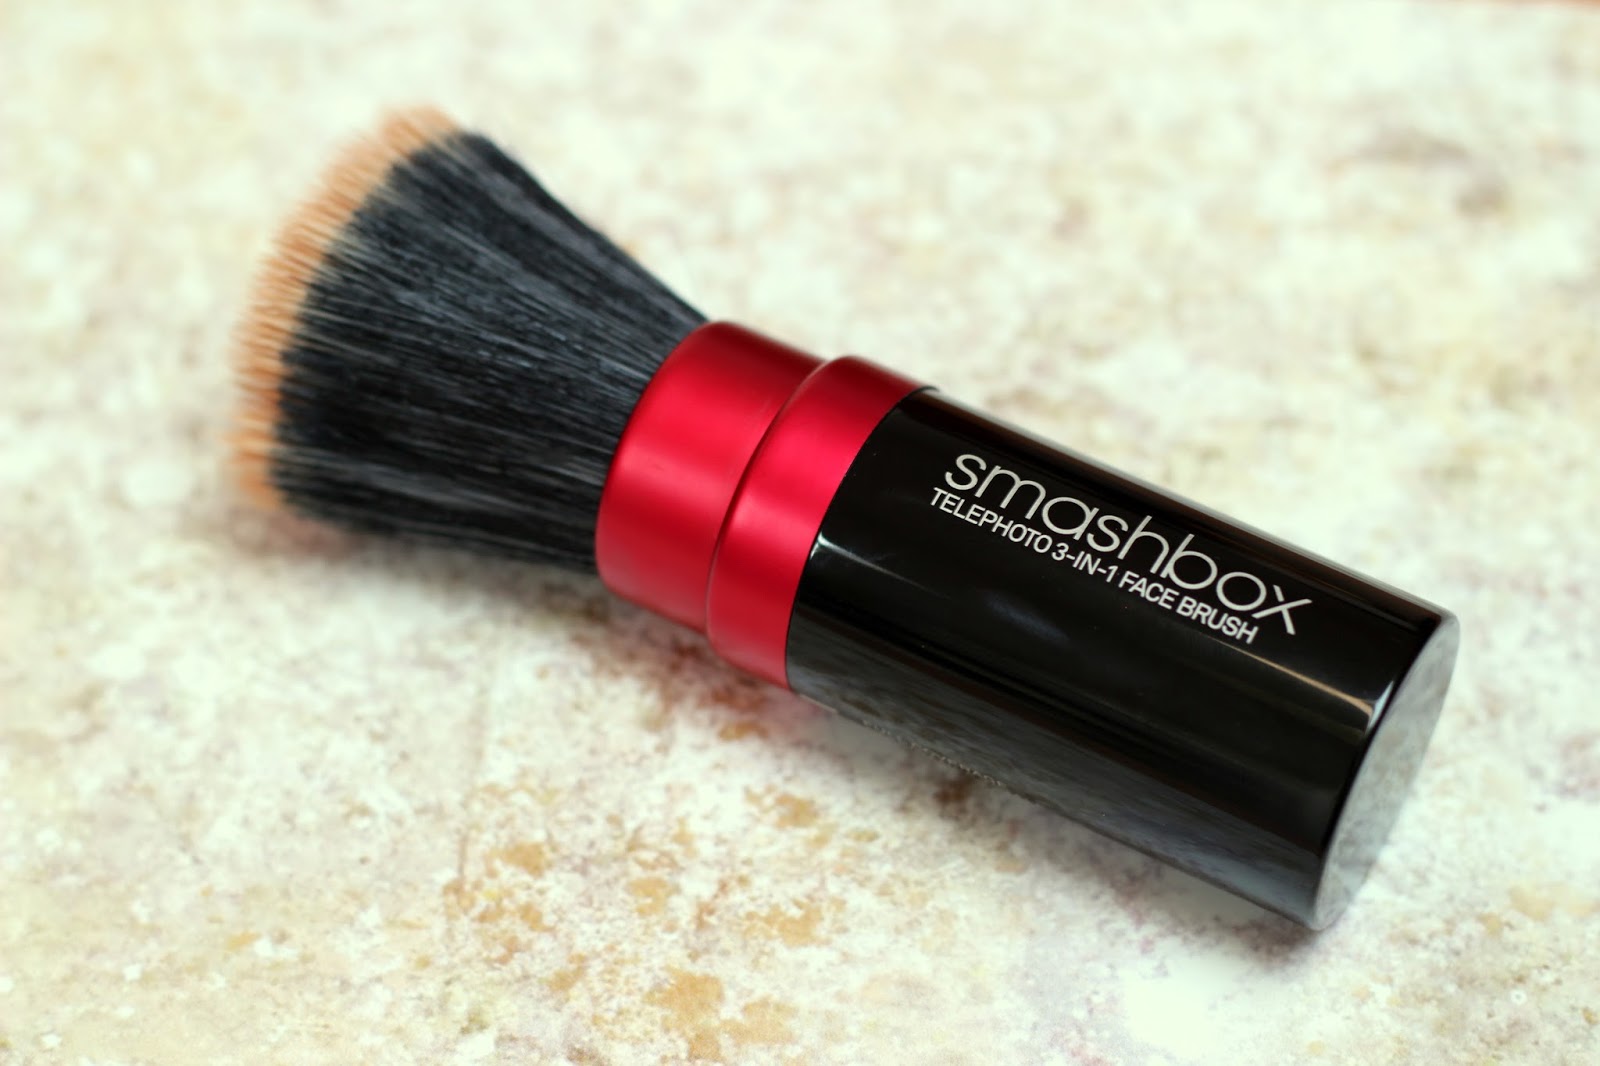 Smashbox Telephoto 3-in-1 Face Brush Review